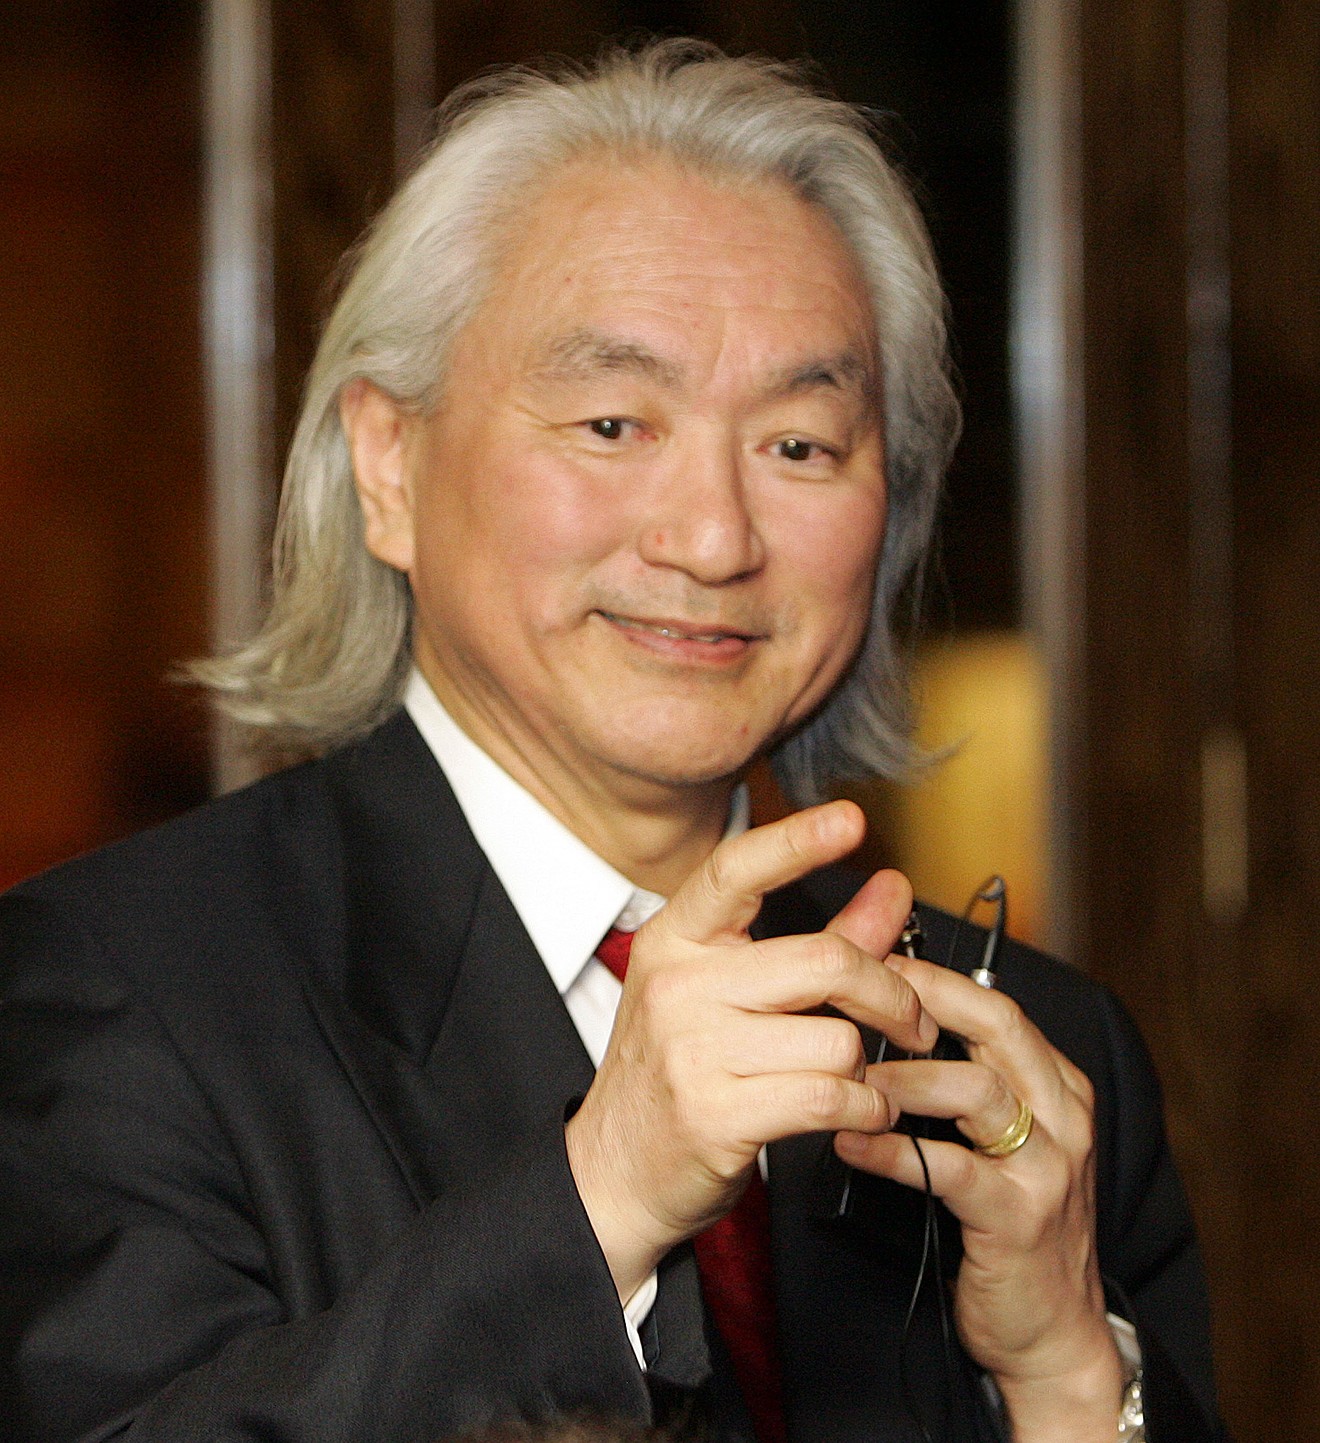 We spoke to physicist Michio Kaku after attending the Flat Earth Conference in Frisco. He confirmed what we sort of suspected ... the Earth is not flat.